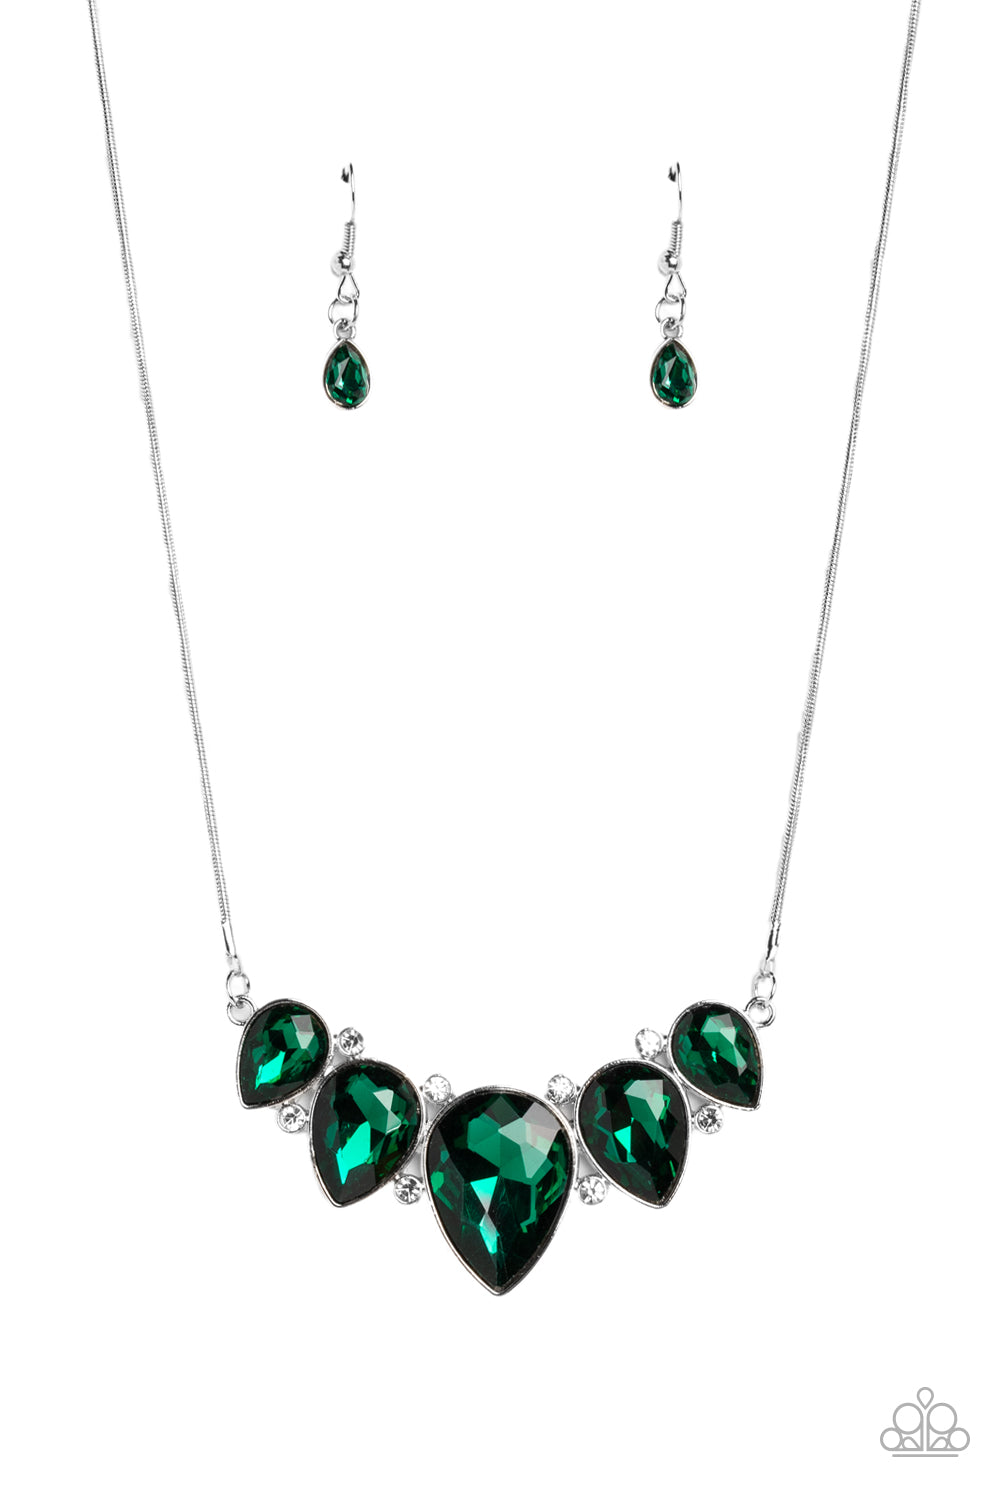 Regally Refined - Green and Silver Necklace - Paparazzi Accessories - A dramatic emerald shade, a collection of teardrop gems hanging from a sleek, silver snake chain, are pressed into high-sheen silver casings, creating a colorful fringe below the collar. Linking each teardrop together, dainty white rhinestones border the tops and bottoms of each shape, creating additional eye-catching dazzle.